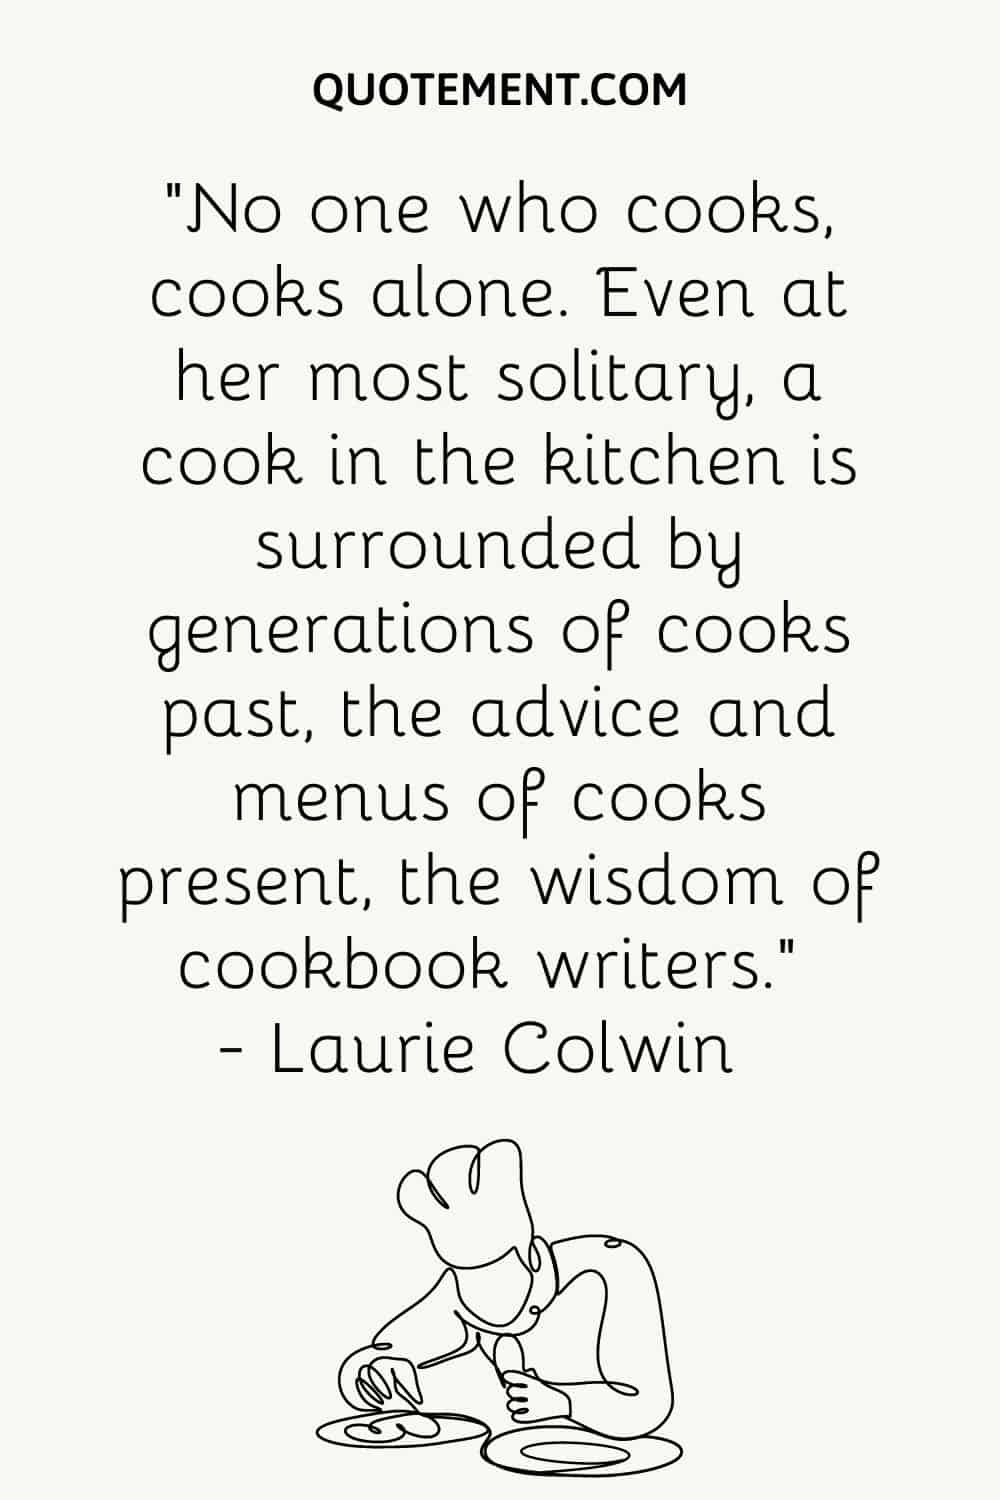 No one who cooks, cooks alone